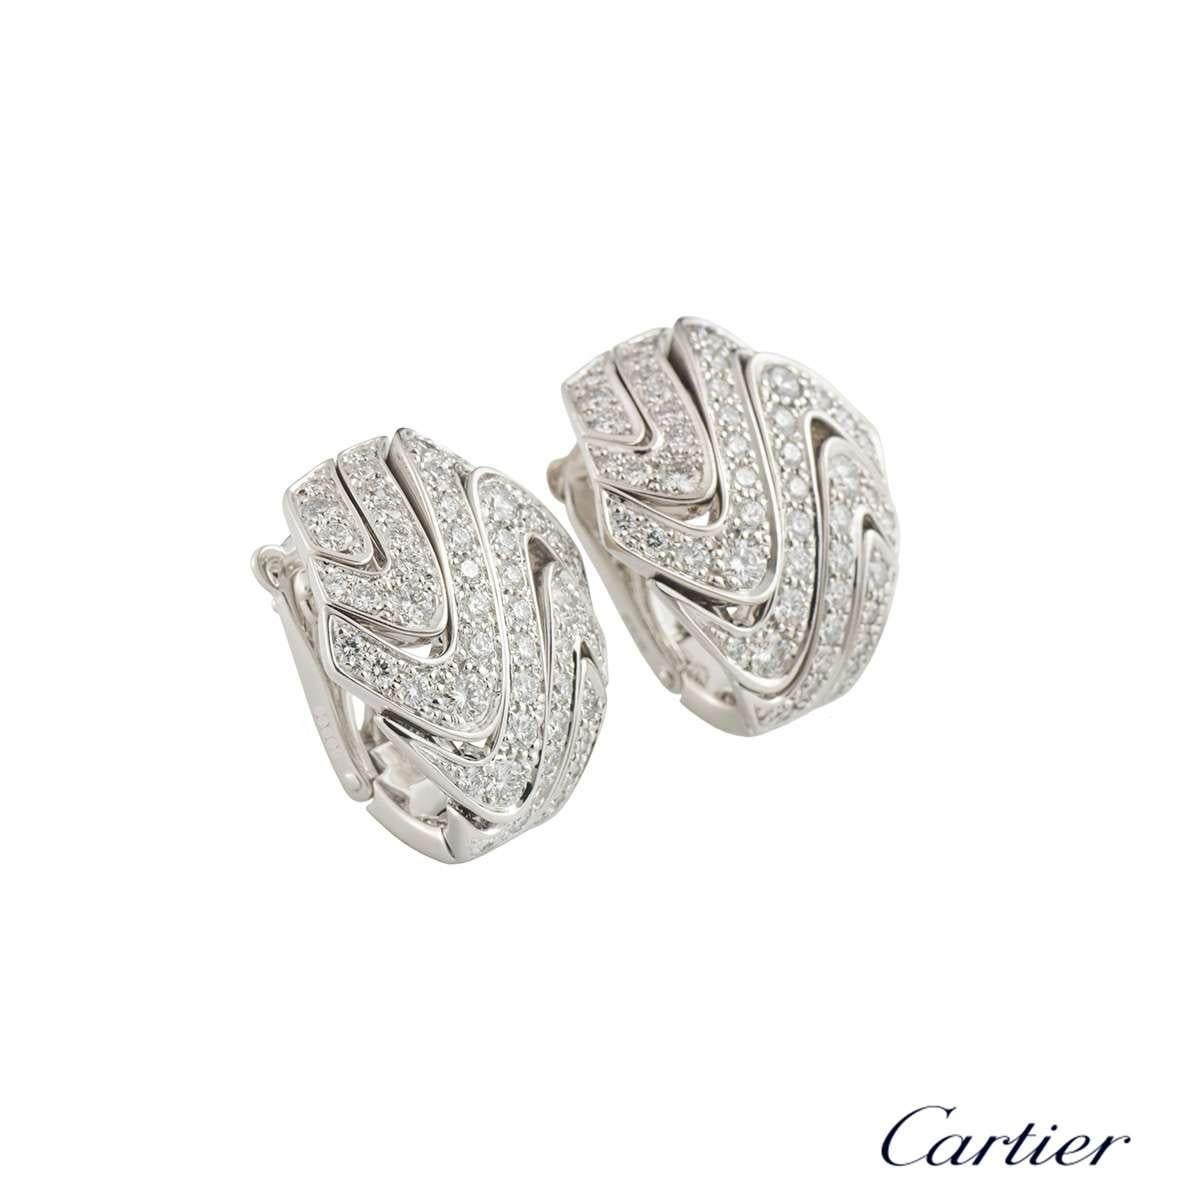 A sparkly pair of 18k white gold diamond Cartier hoop earrings. The earrings each comprise of 6 wave motifs graduating in size with 55 round brilliant cut diamonds. The diamonds have a total weight of approximately 1.74ct, F+ colour and VS+ clarity.